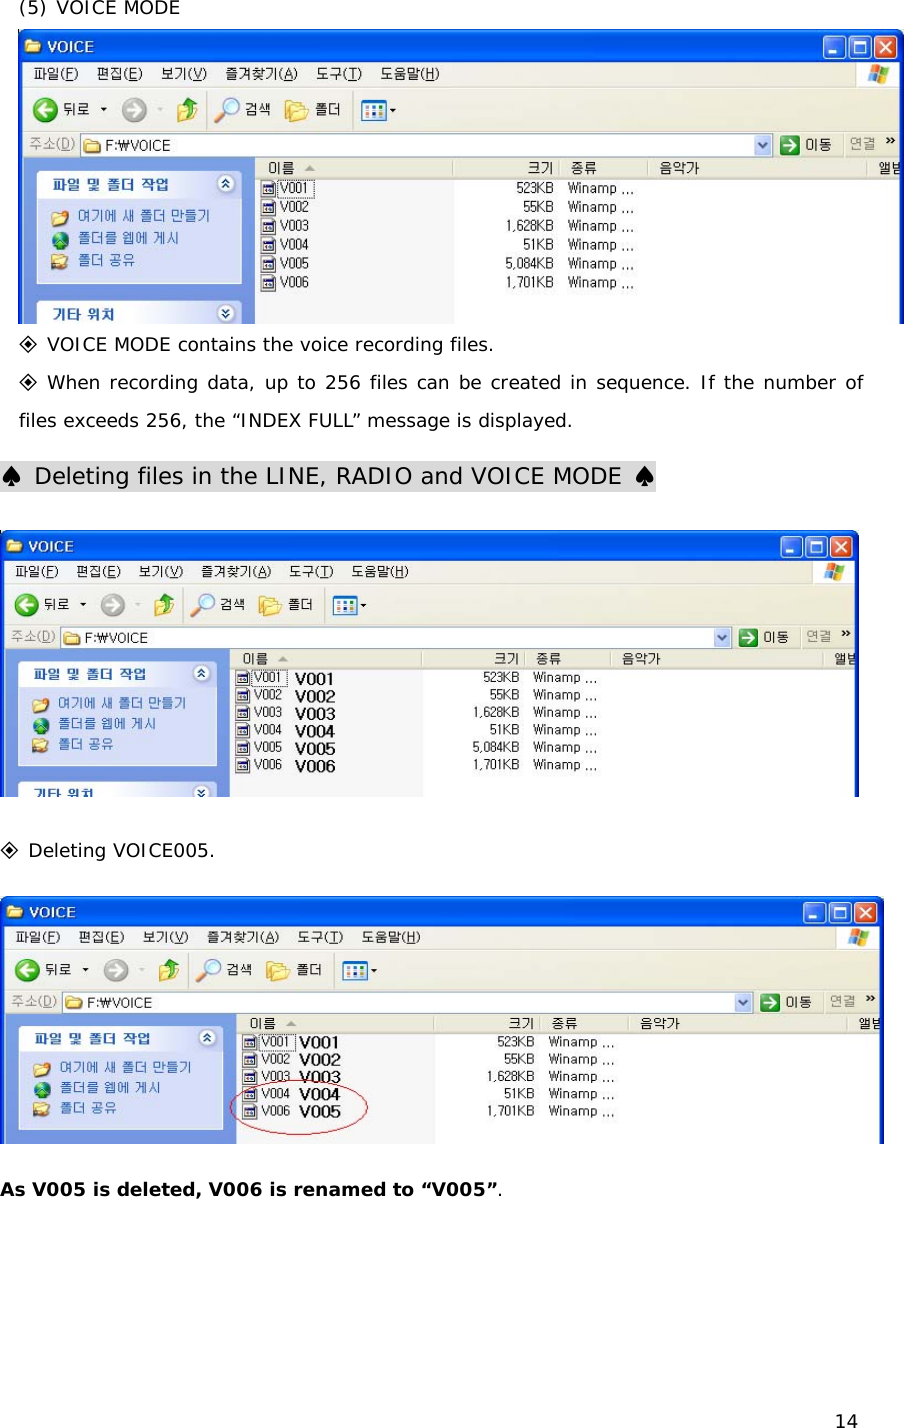 14 (5) VOICE MODE ◈ VOICE MODE contains the voice recording files.  ◈ When recording data, up to 256 files can be created in sequence. If the number of files exceeds 256, the “INDEX FULL” message is displayed. ♠ Deleting files in the LINE, RADIO and VOICE MODE ♠  ◈ Deleting VOICE005.    As V005 is deleted, V006 is renamed to “V005”. 